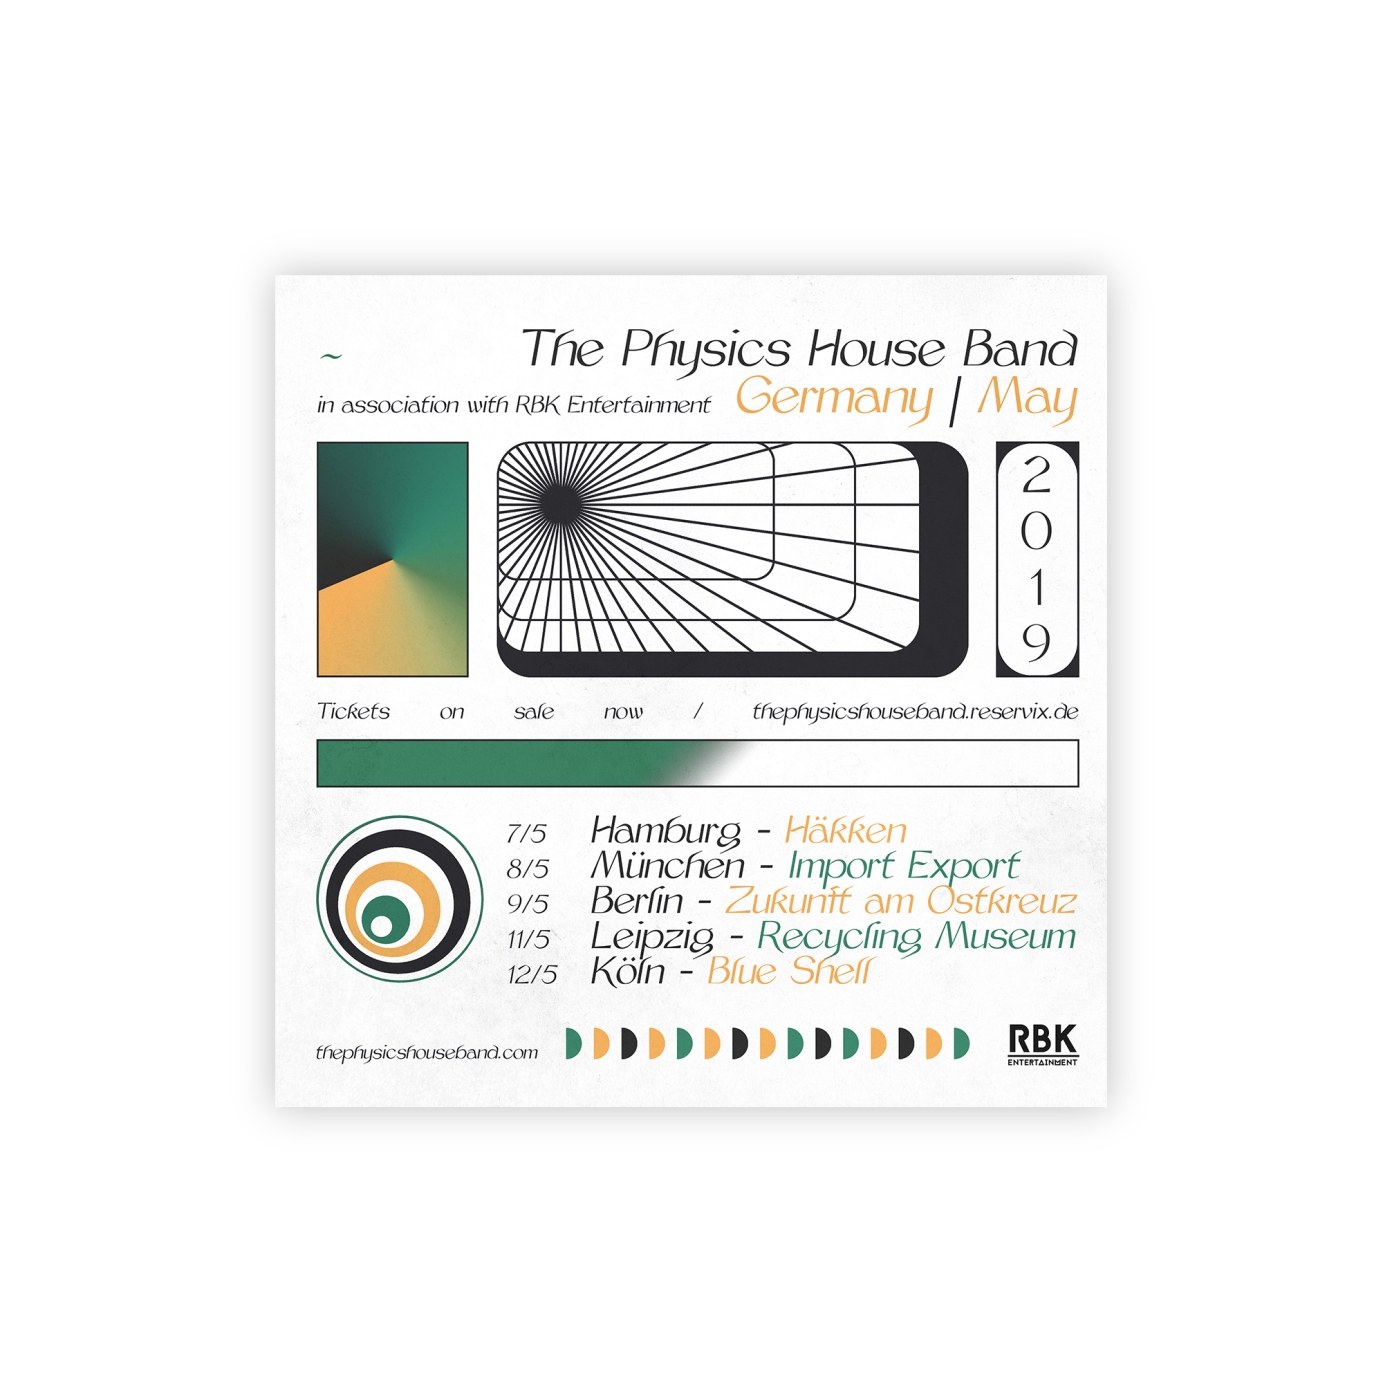 Artwork for The Physics House Band by Jack Hardwicke